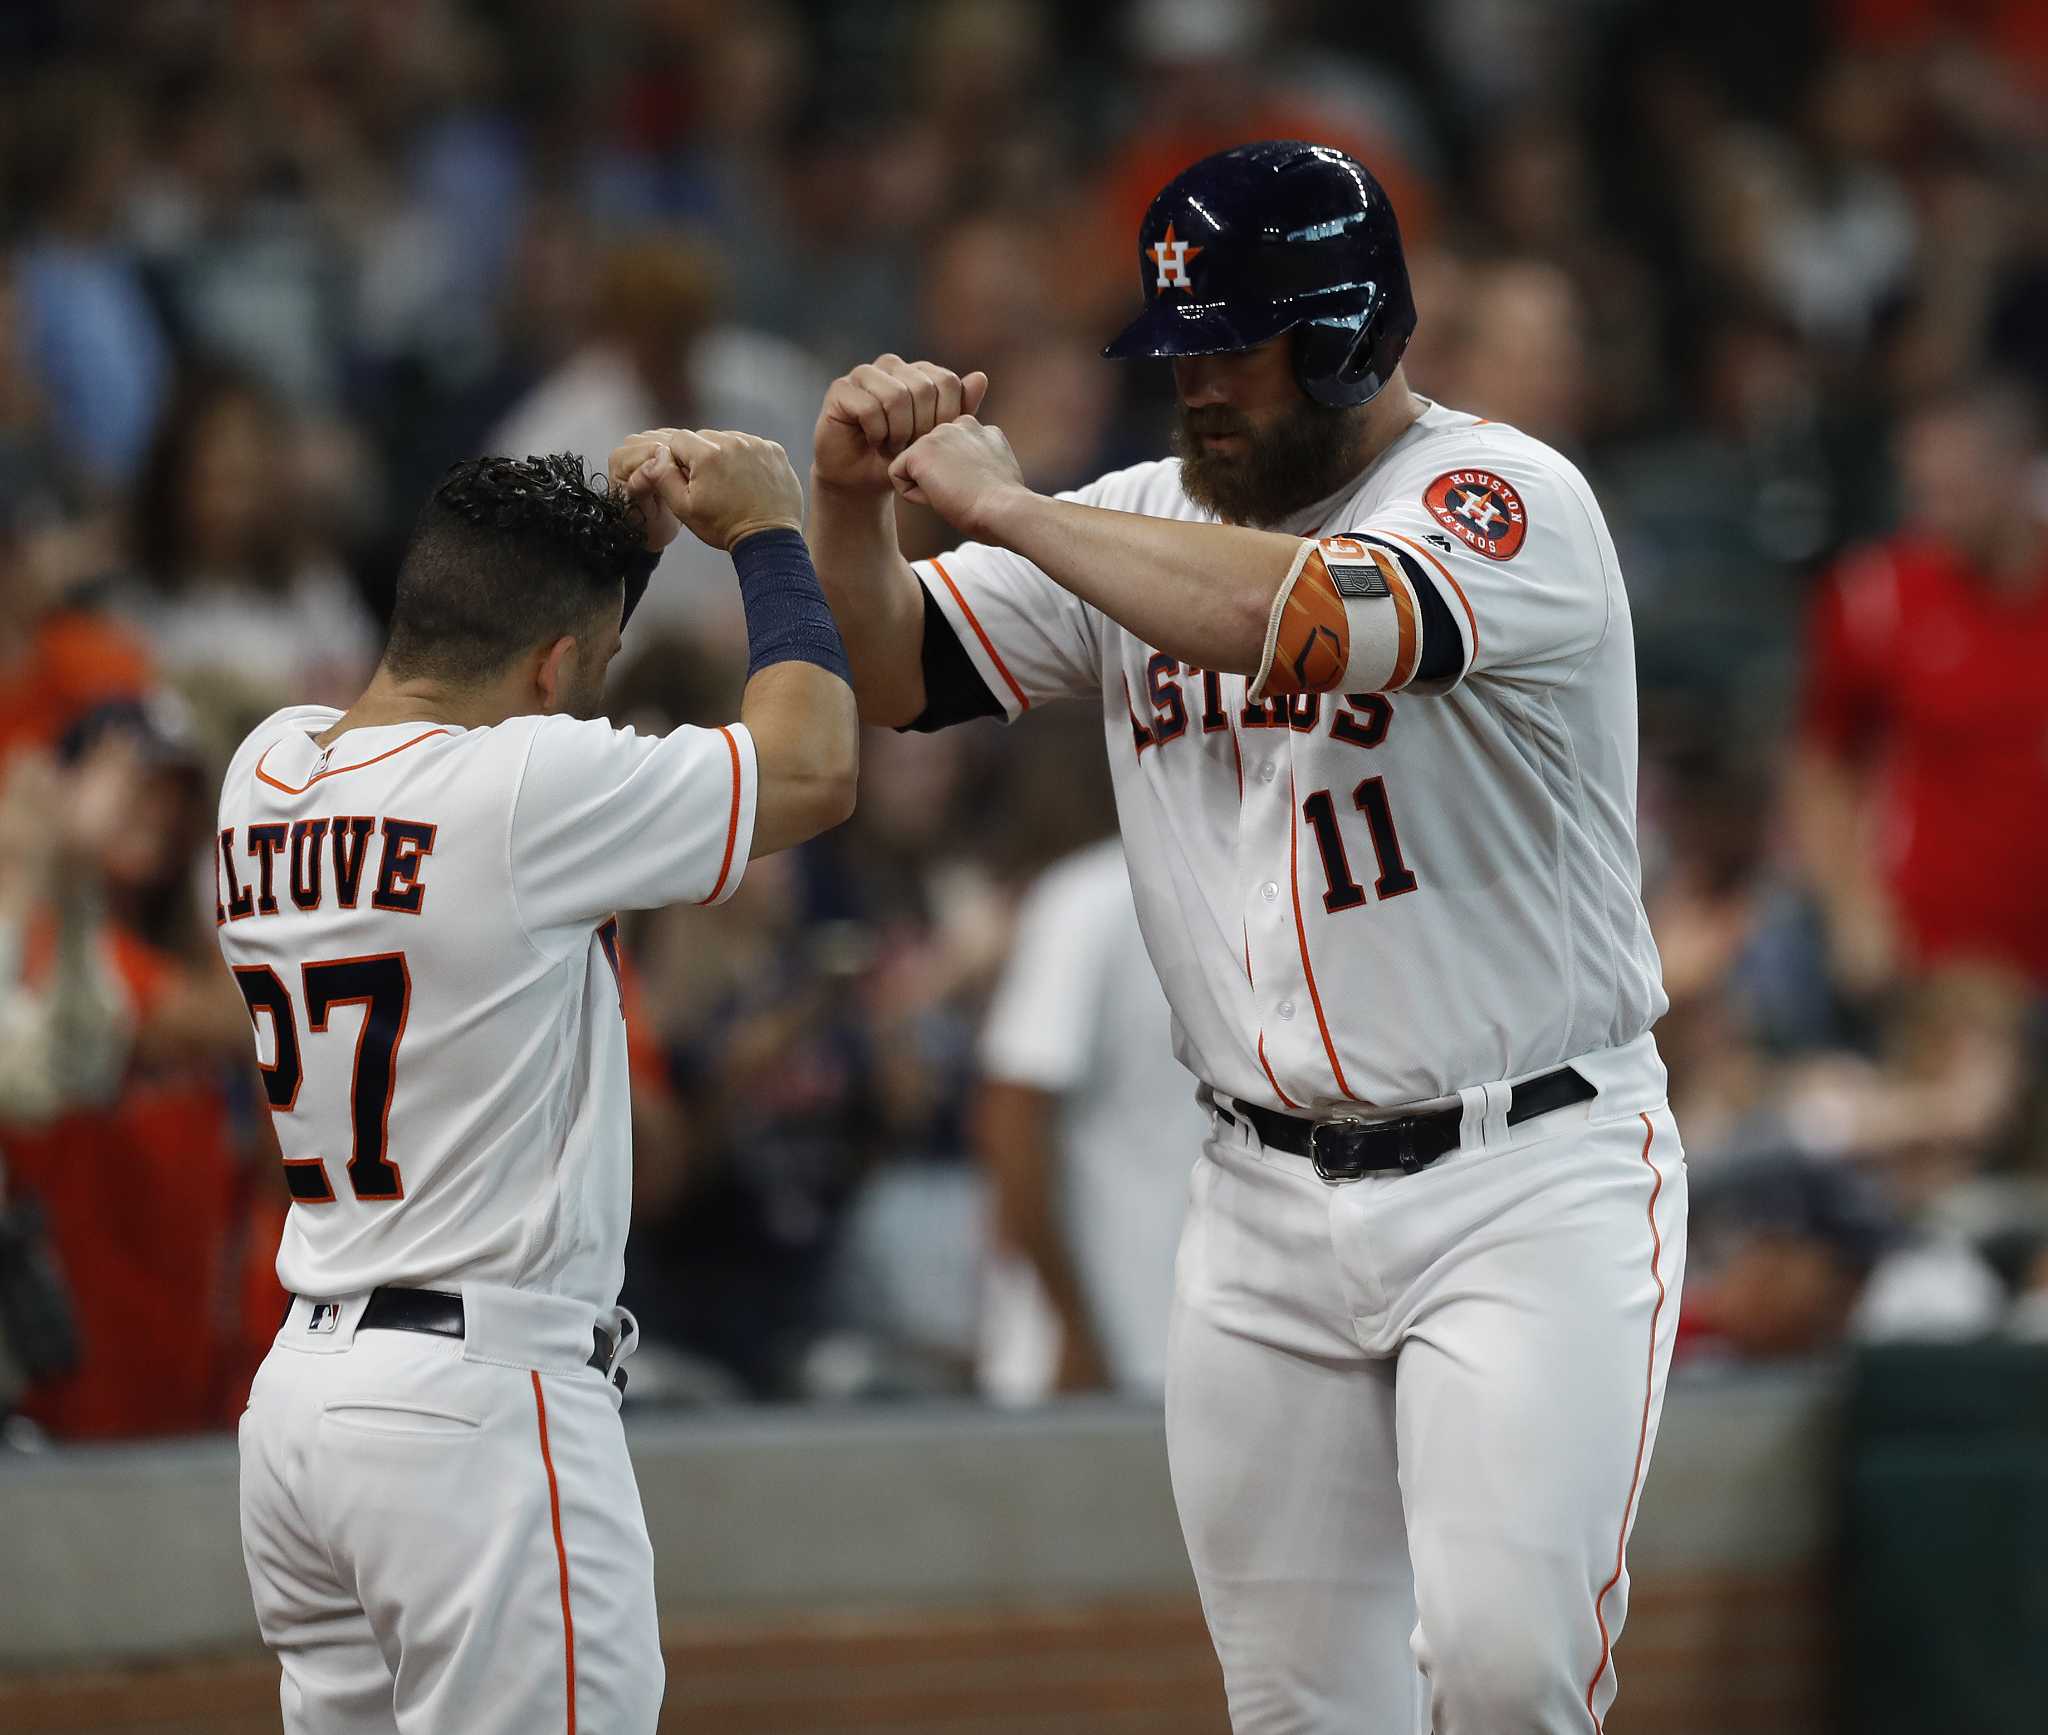 Marisnick's 2 homers, 5 RBIs power Astros past Rays 14-7